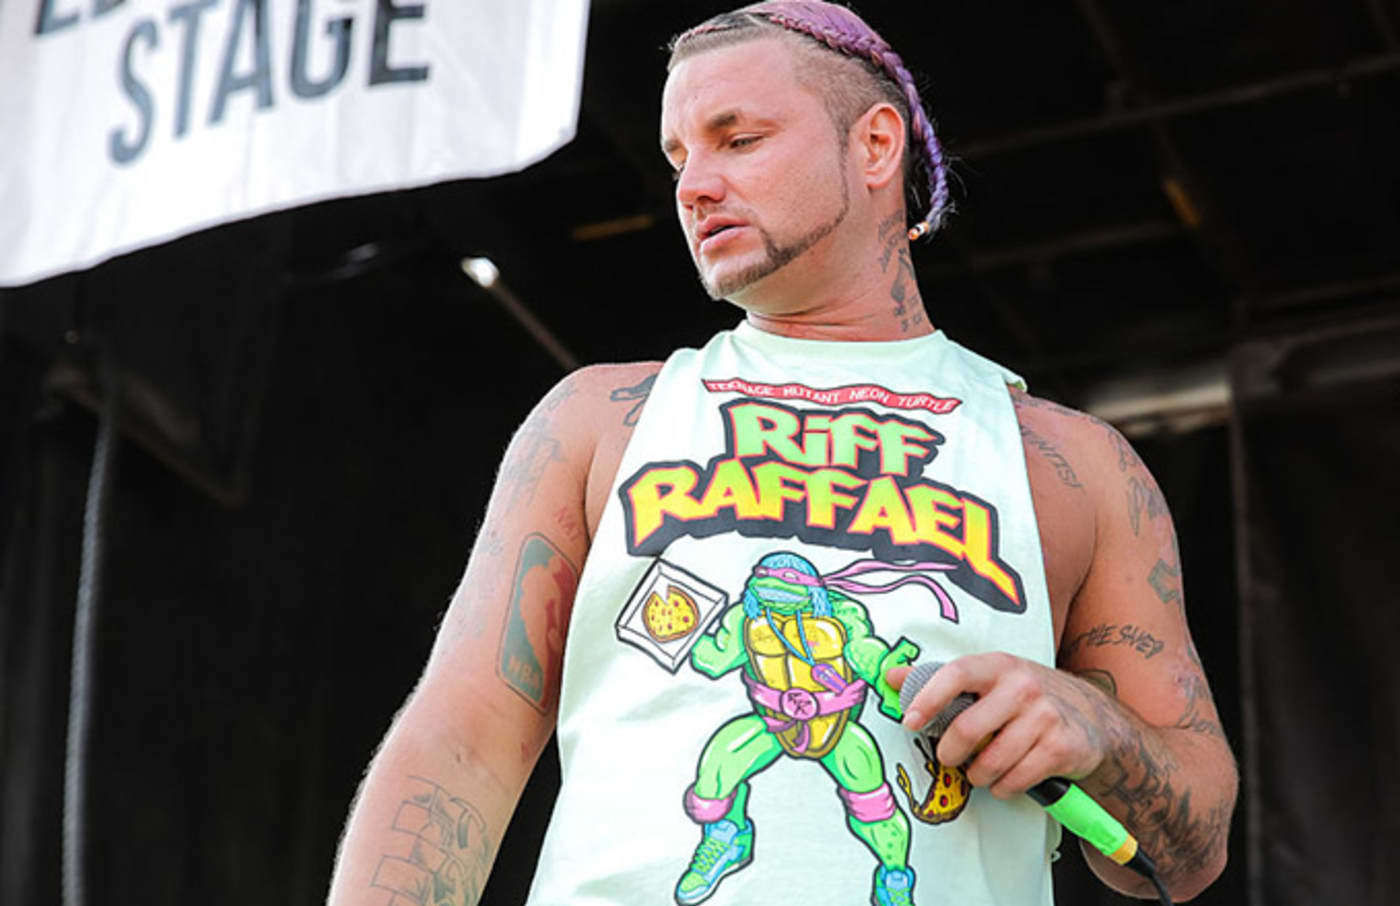 This is a photo of Riff Raff.